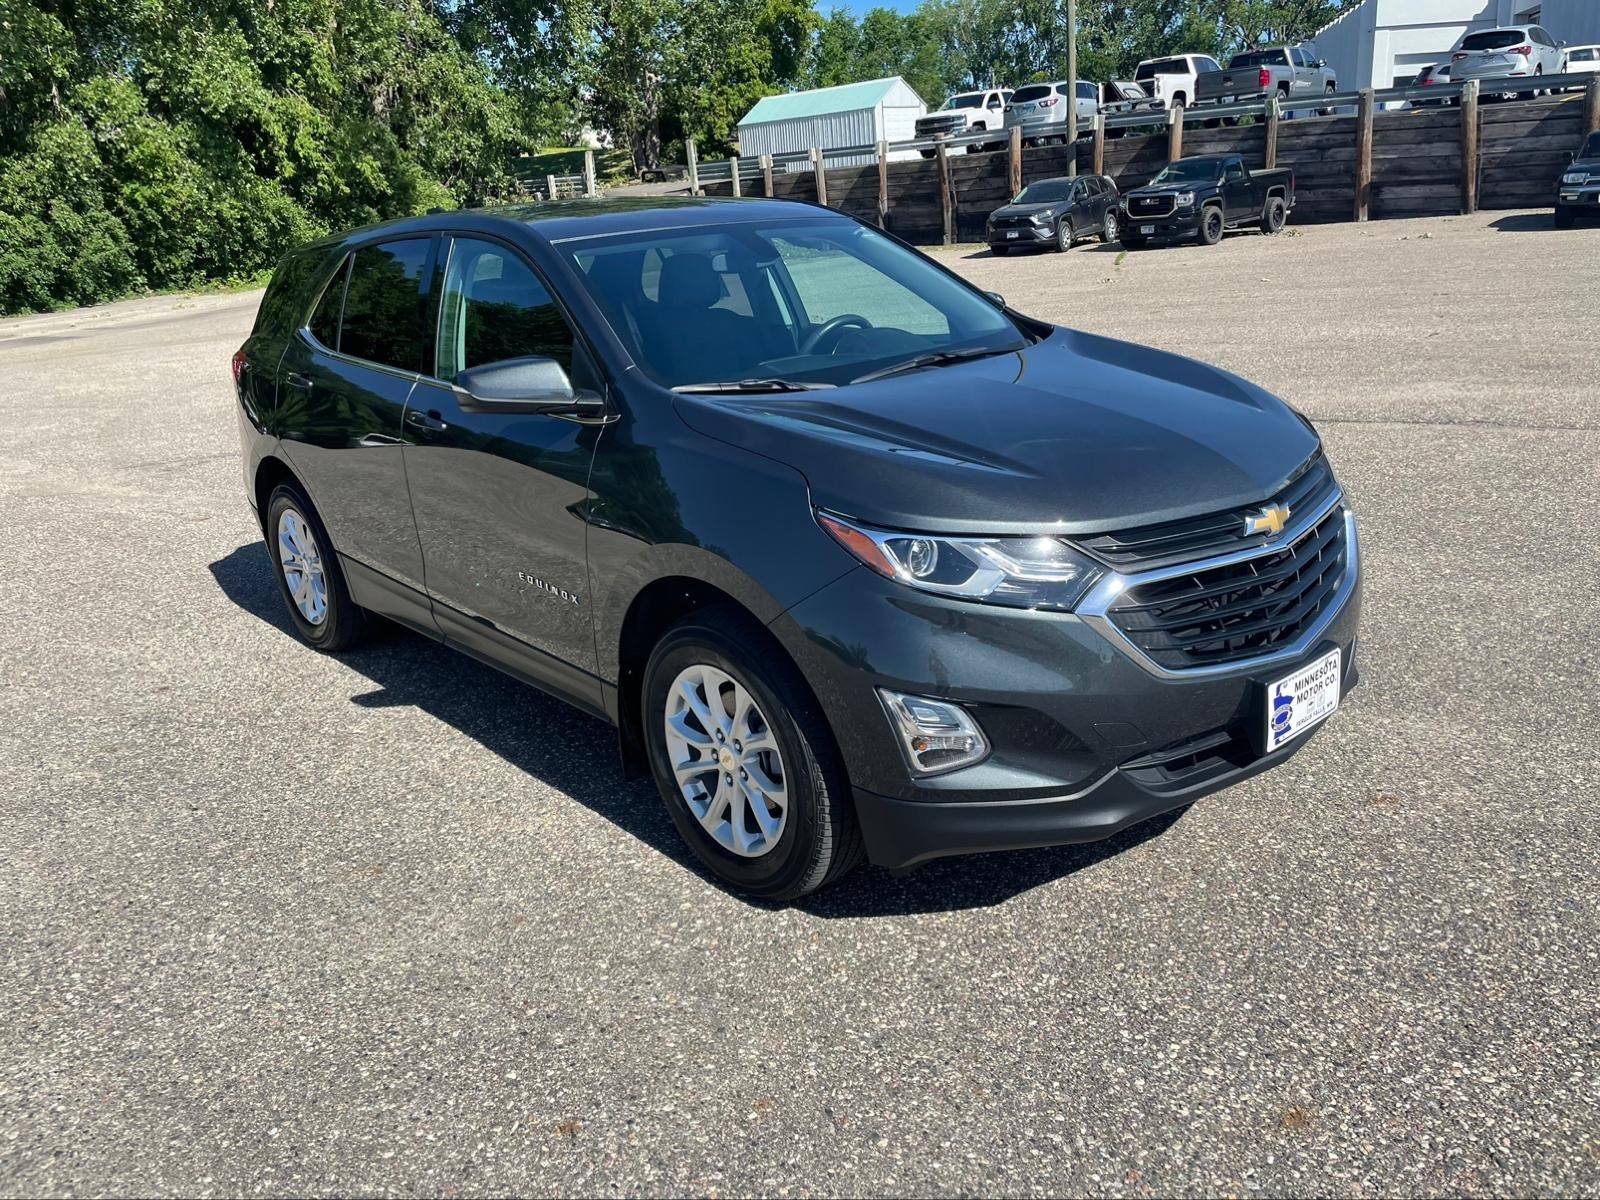 Used 2019 Chevrolet Equinox LT with VIN 2GNAXUEV1K6237304 for sale in Fergus Falls, Minnesota